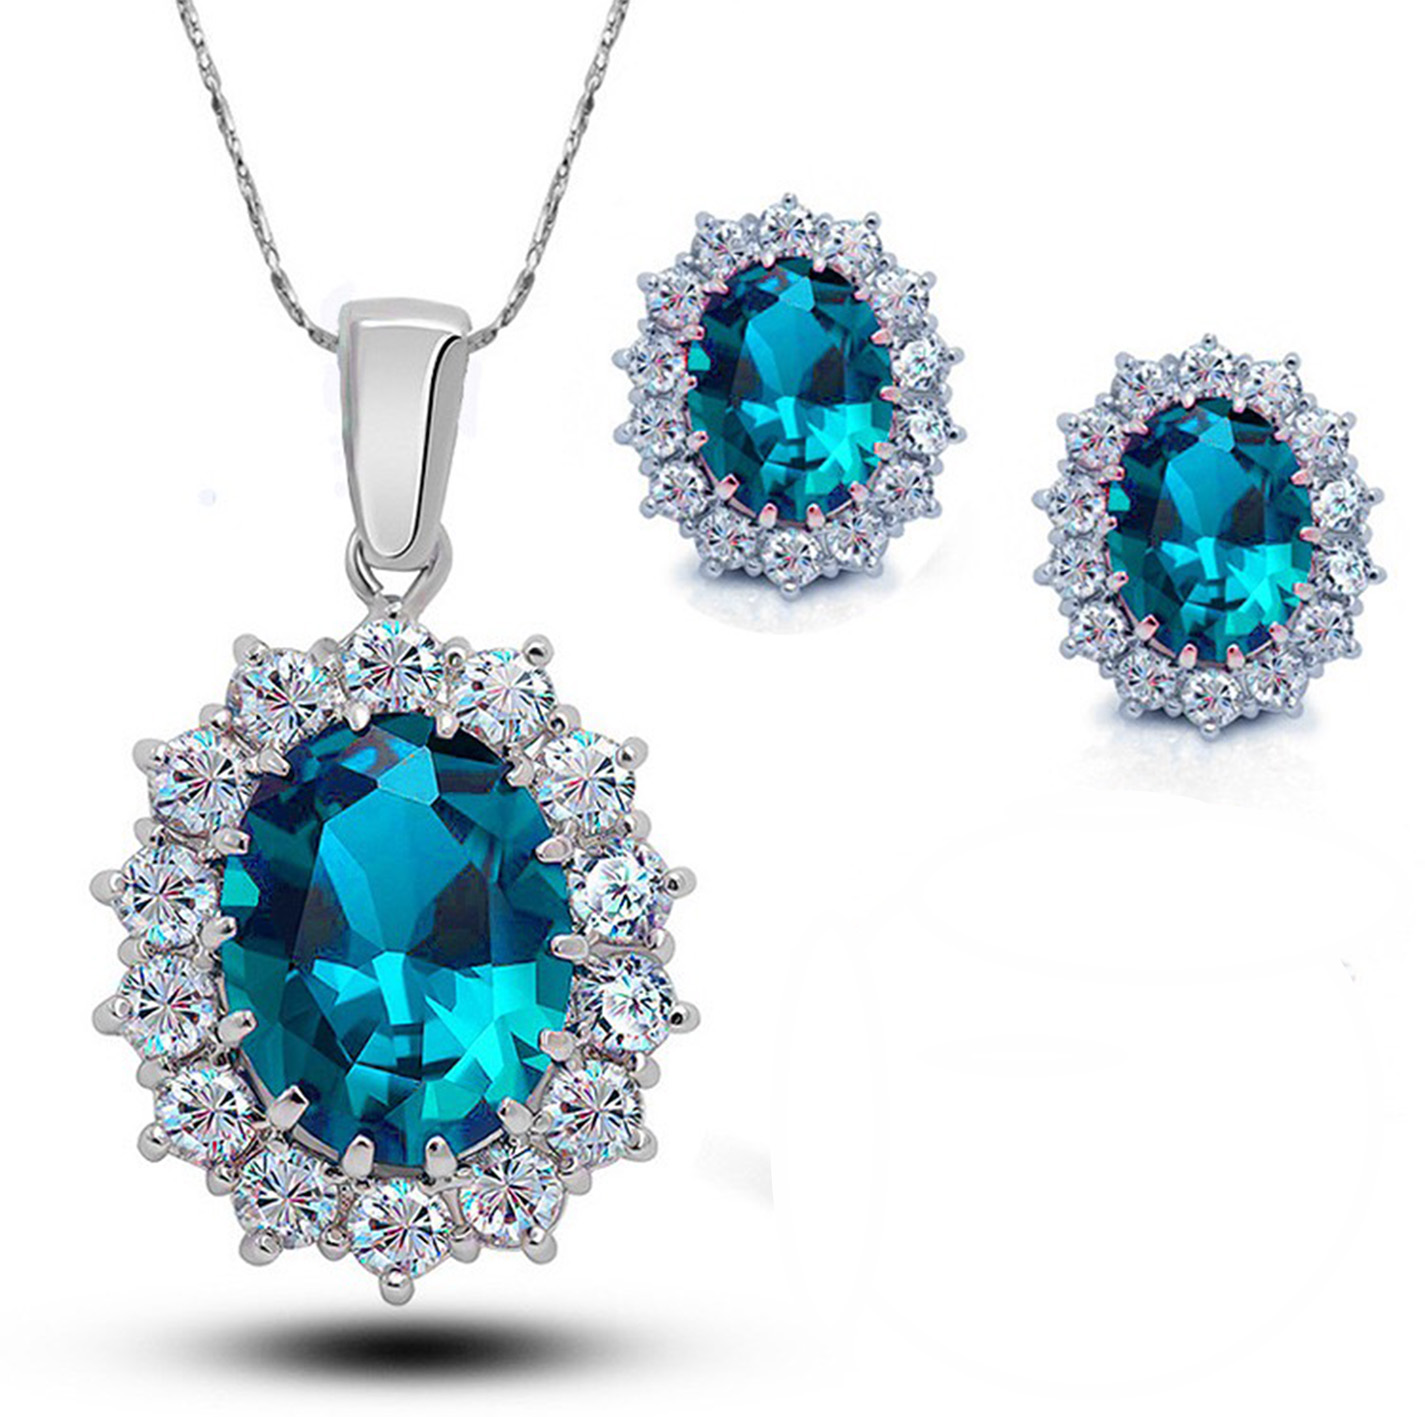 Bonjour Jewelers 1 Cttw Oval Shape Aquamarine 18 Inch Necklace And Earrings Set In 18k Gold Plated